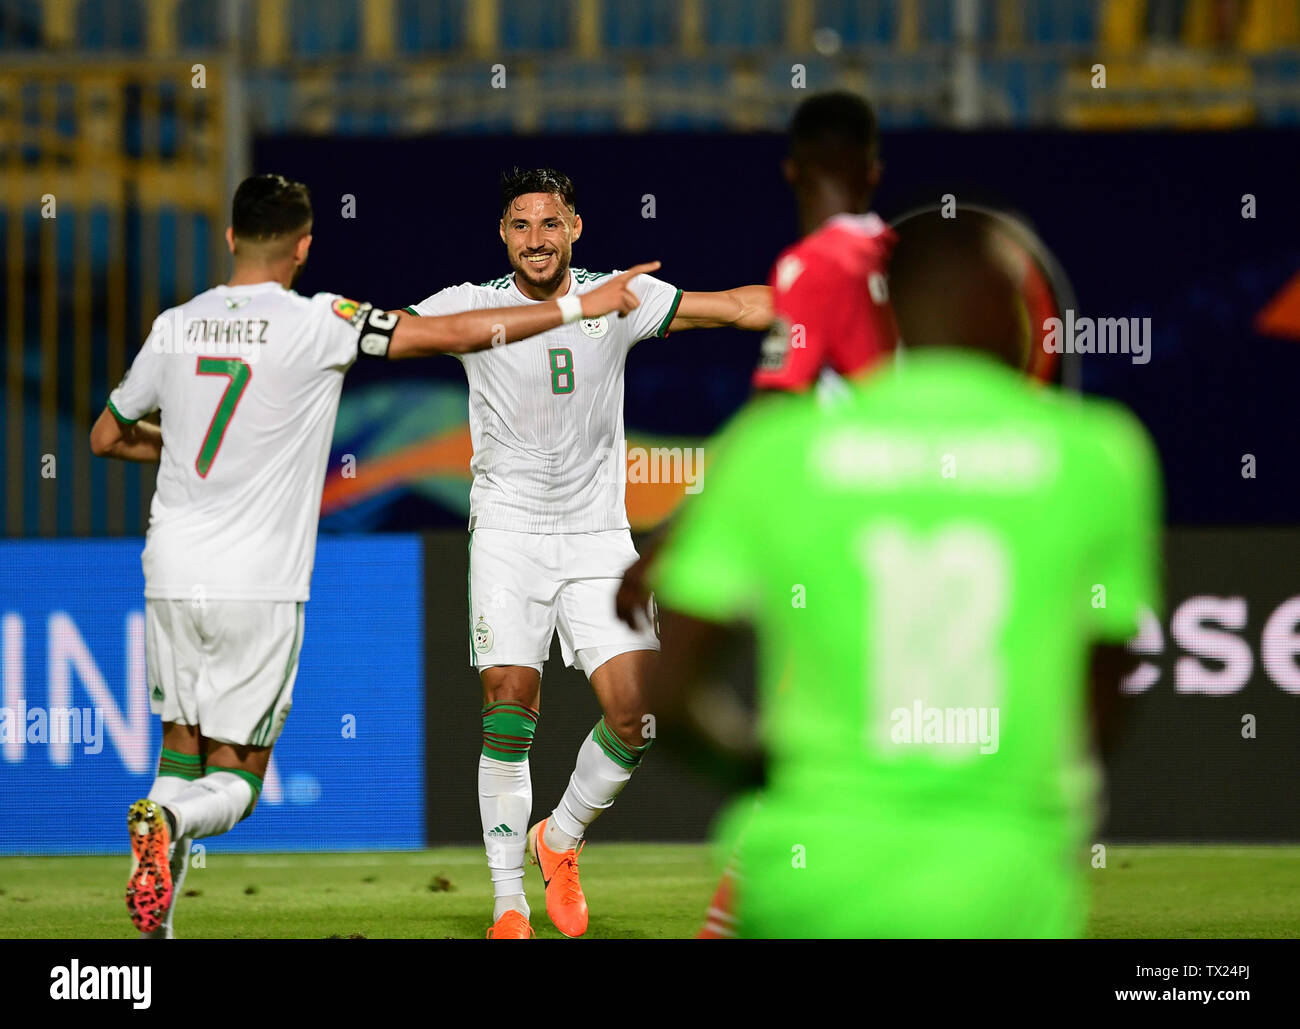 Cairo. 23rd June, 2019. Riyad Mahrez (1st L) of Algeria celebrates scoring with teammates during the 2019 African Cup of Nations Group C match between Algeria and Kenya in Cario, Egypt on June 23, 2019. Algeria won 2-0. Credit: Wu Huiwo/Xinhua/Alamy Live News Stock Photo